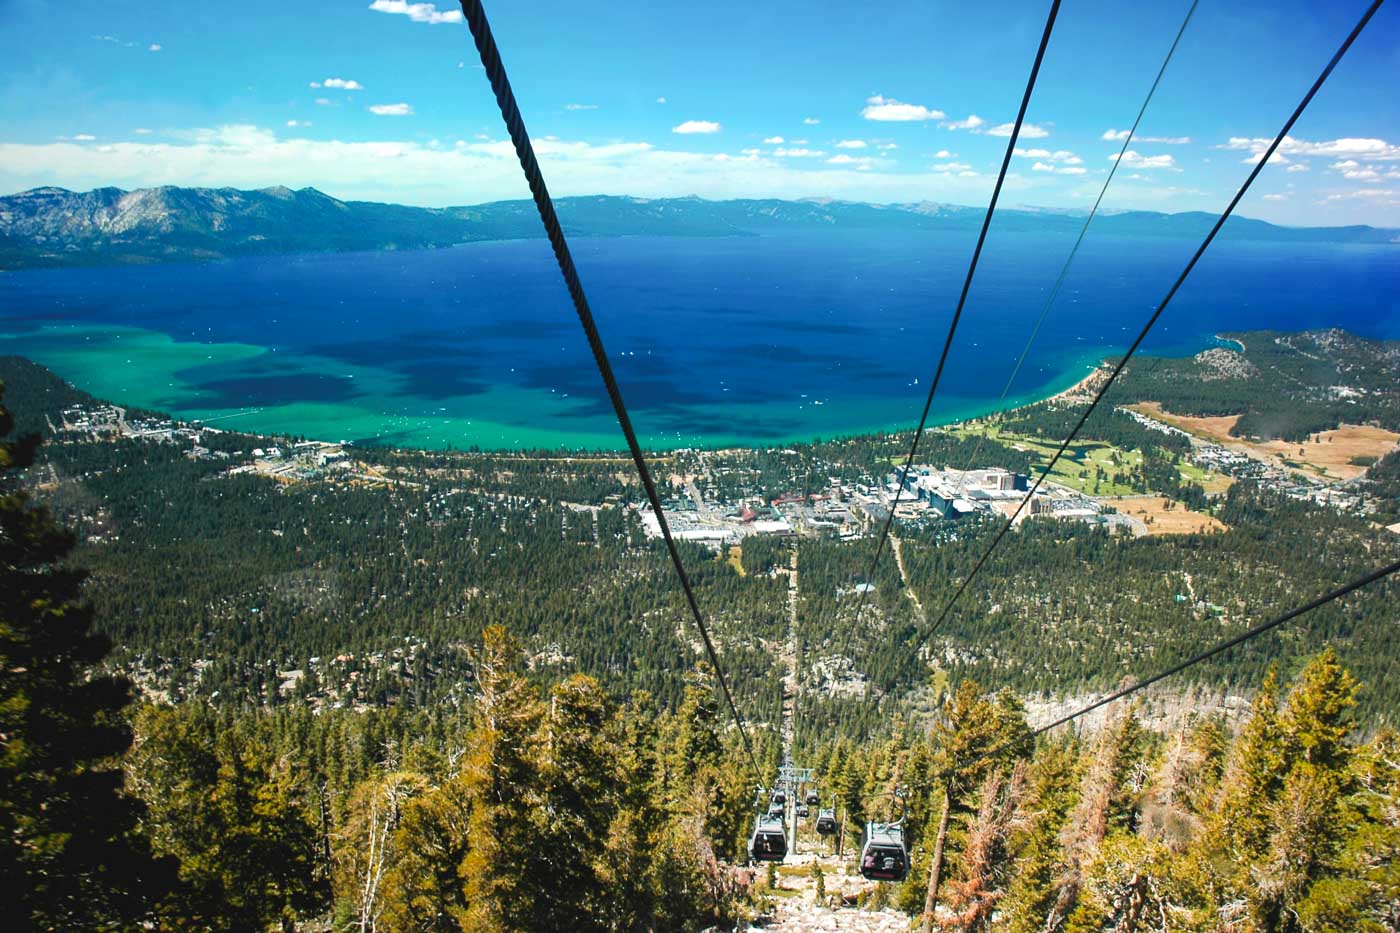 View over Lake Tahoe and the surrounding area as seen from the gondola.